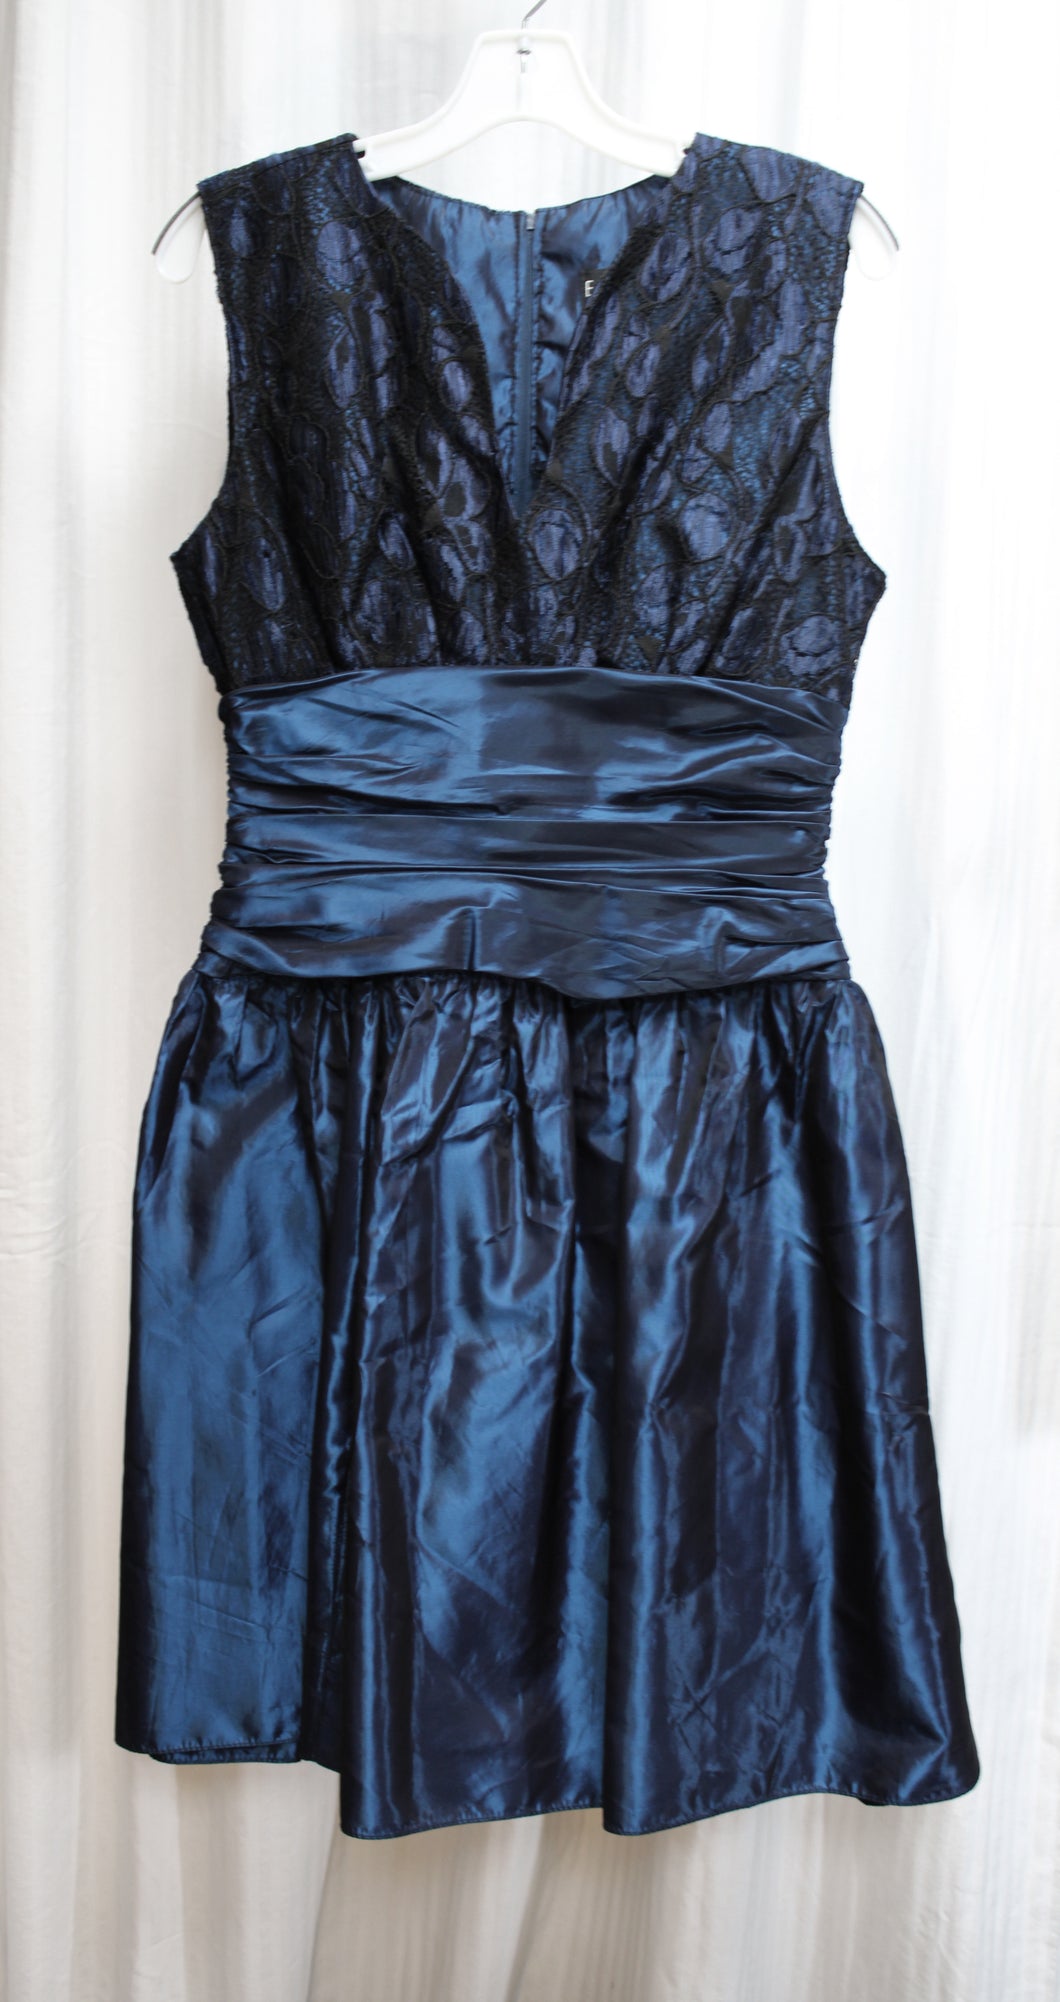 Vintage - Expo Nite - Black & Blue Colorshift Fit & Flare w/ Lace Bodice Overlay Cocktail Party Dress - Size 10